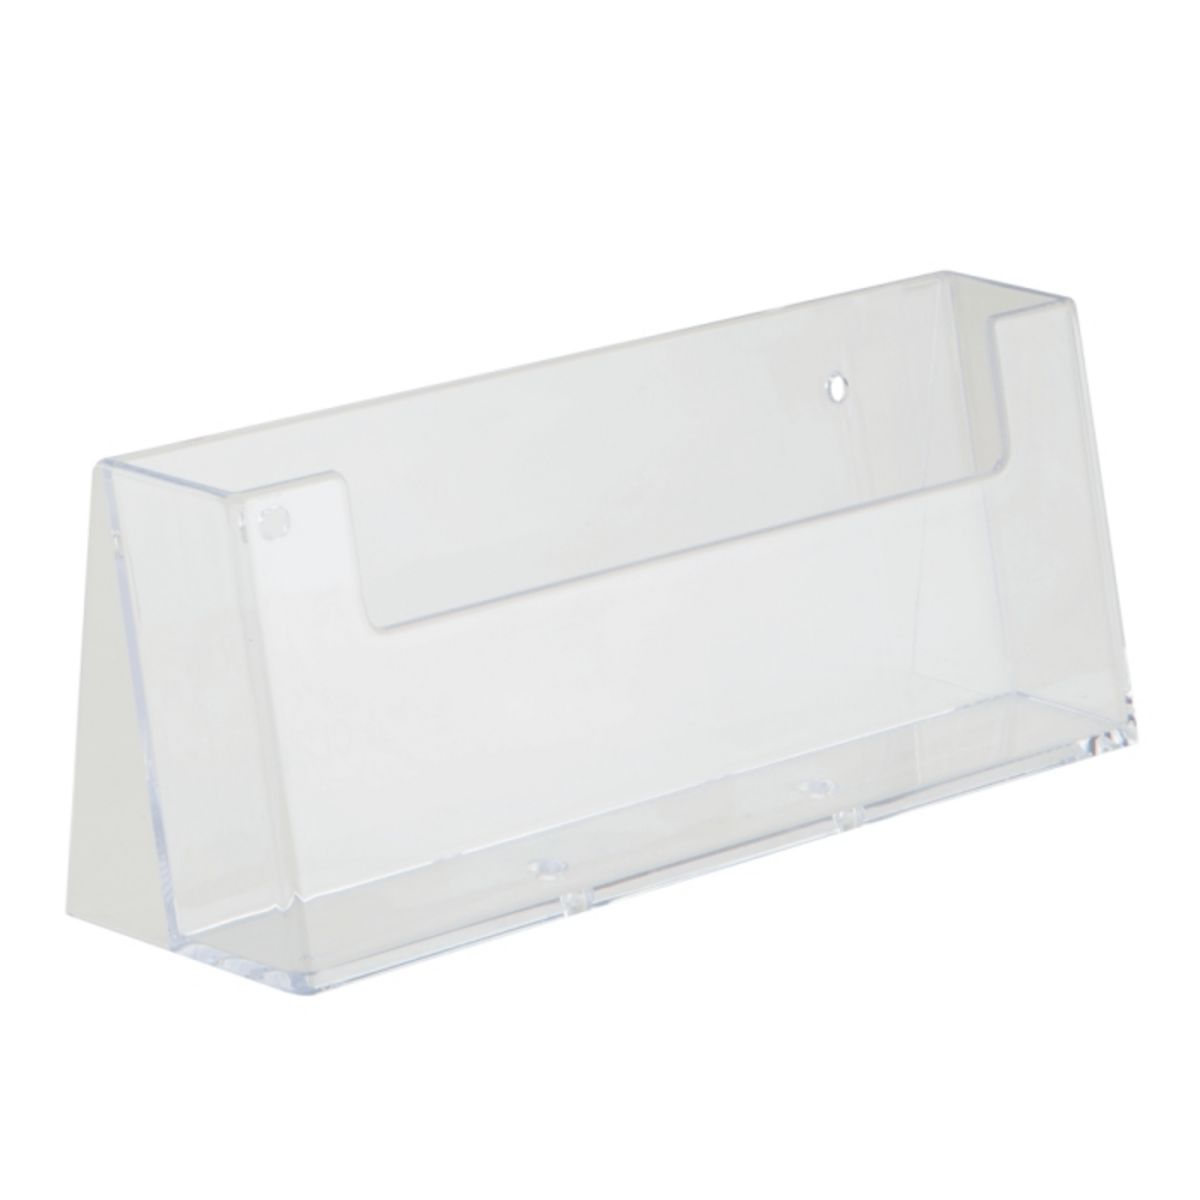 1 3rd A4 leaflet holder for counter standing or wall mounting.png